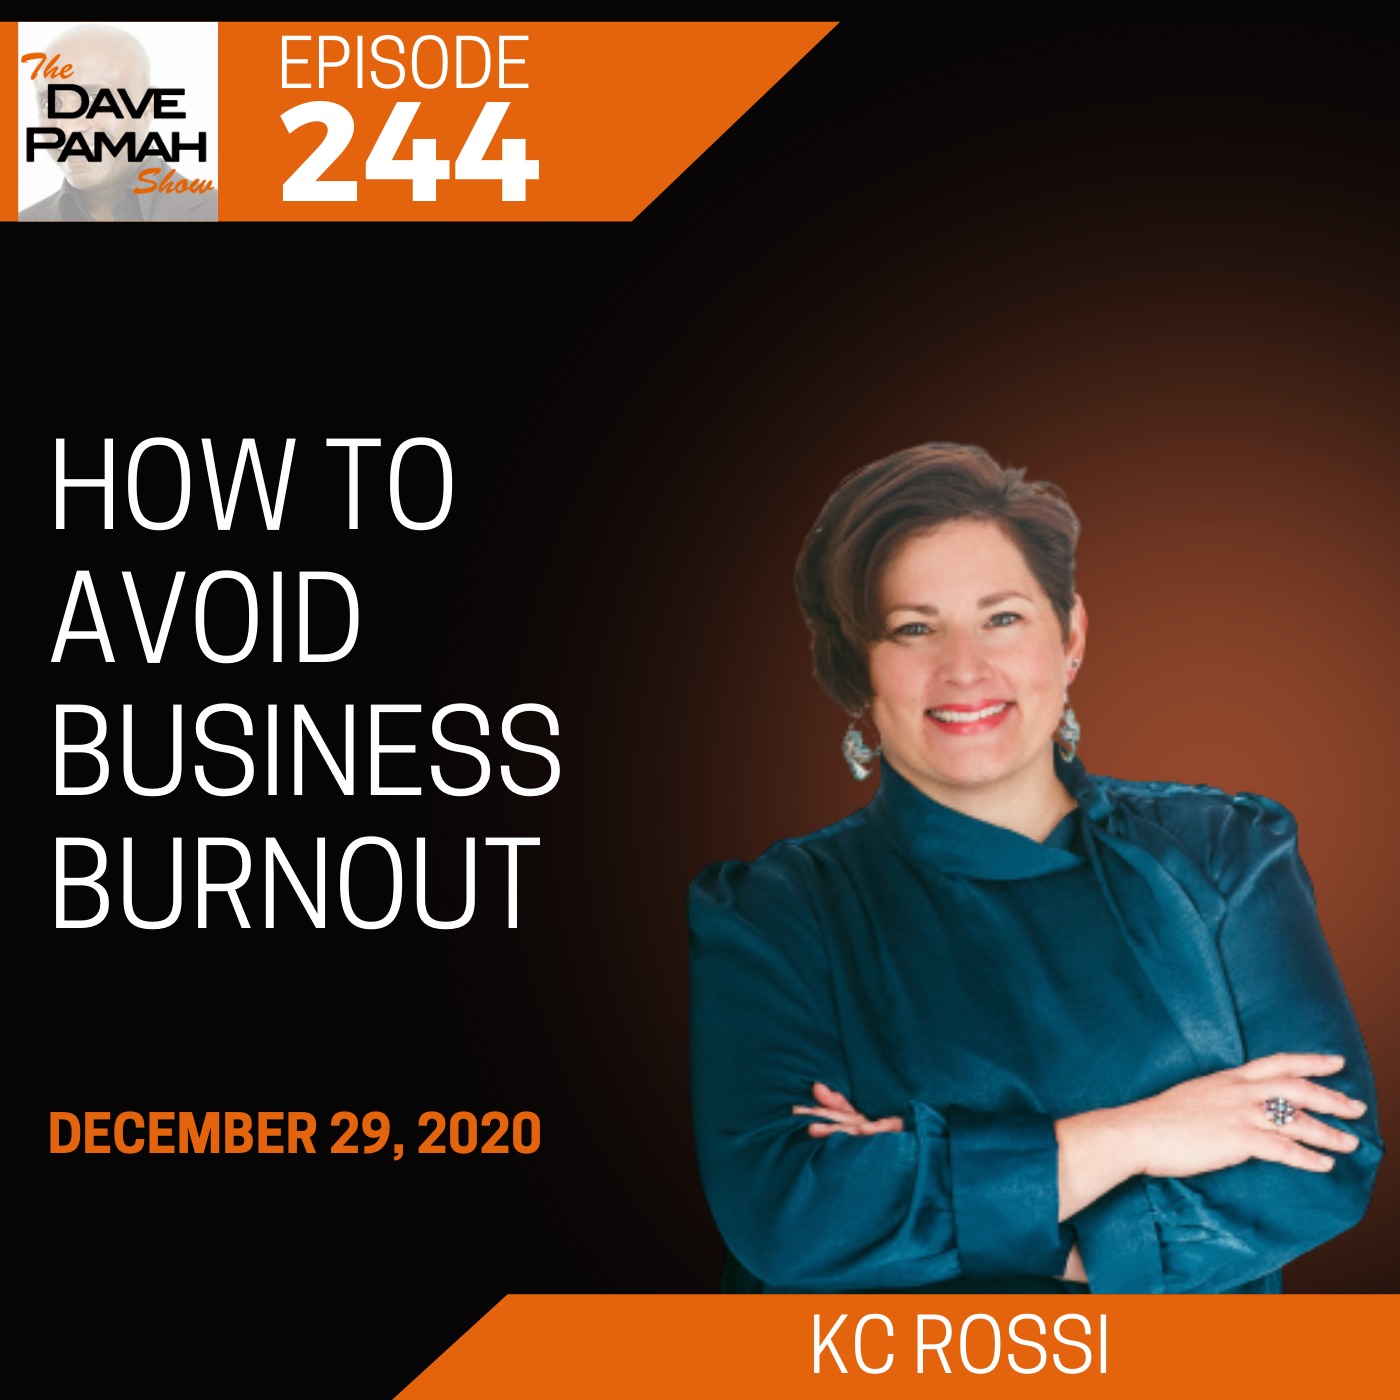 How to avoid business burnout with Kc Rossi Image